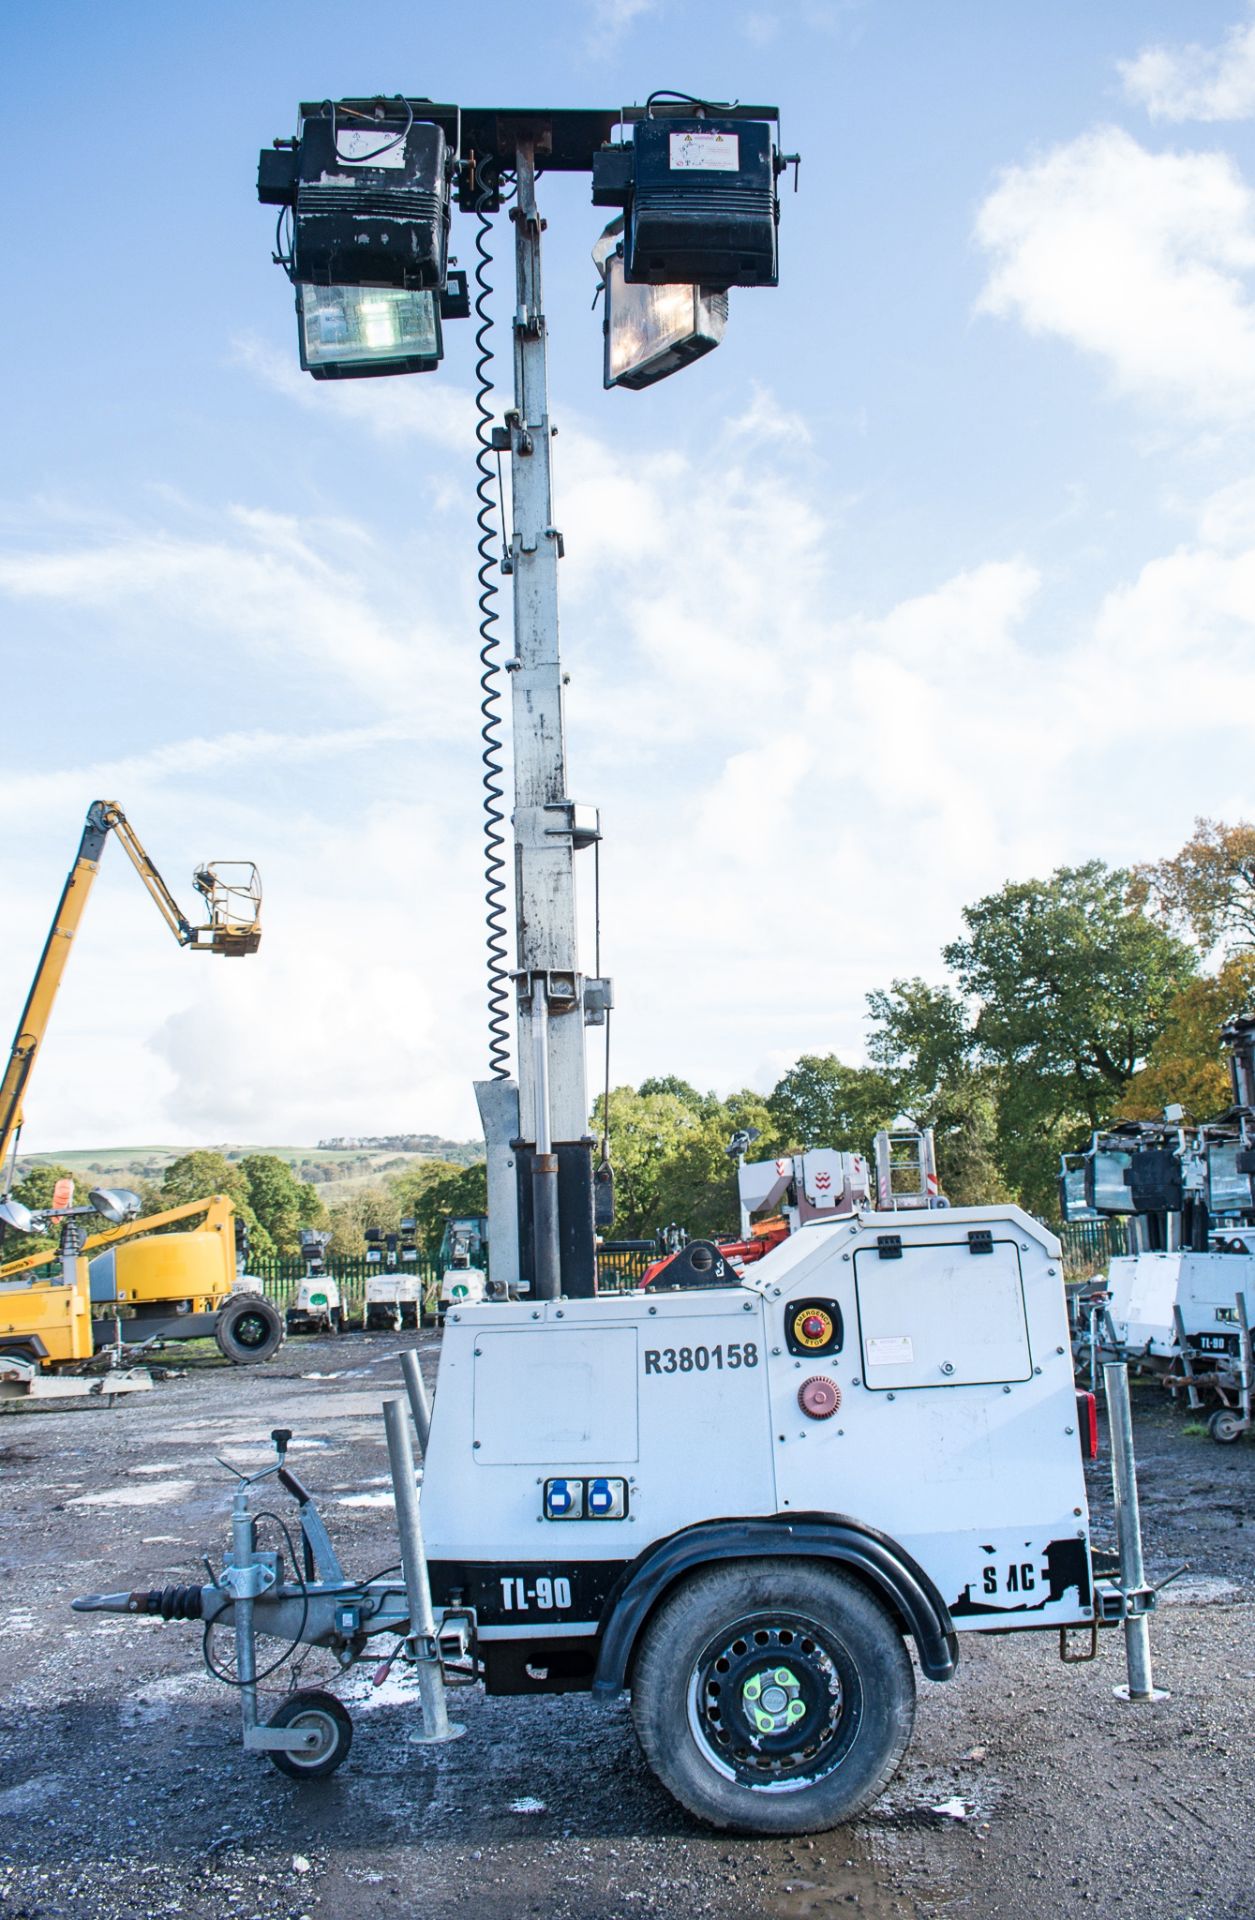 SMC TL-90 diesel driven mobile lighting tower Year: 2012 S/N: 129399 Recorded hours: 4493 R380158 - Image 5 of 8